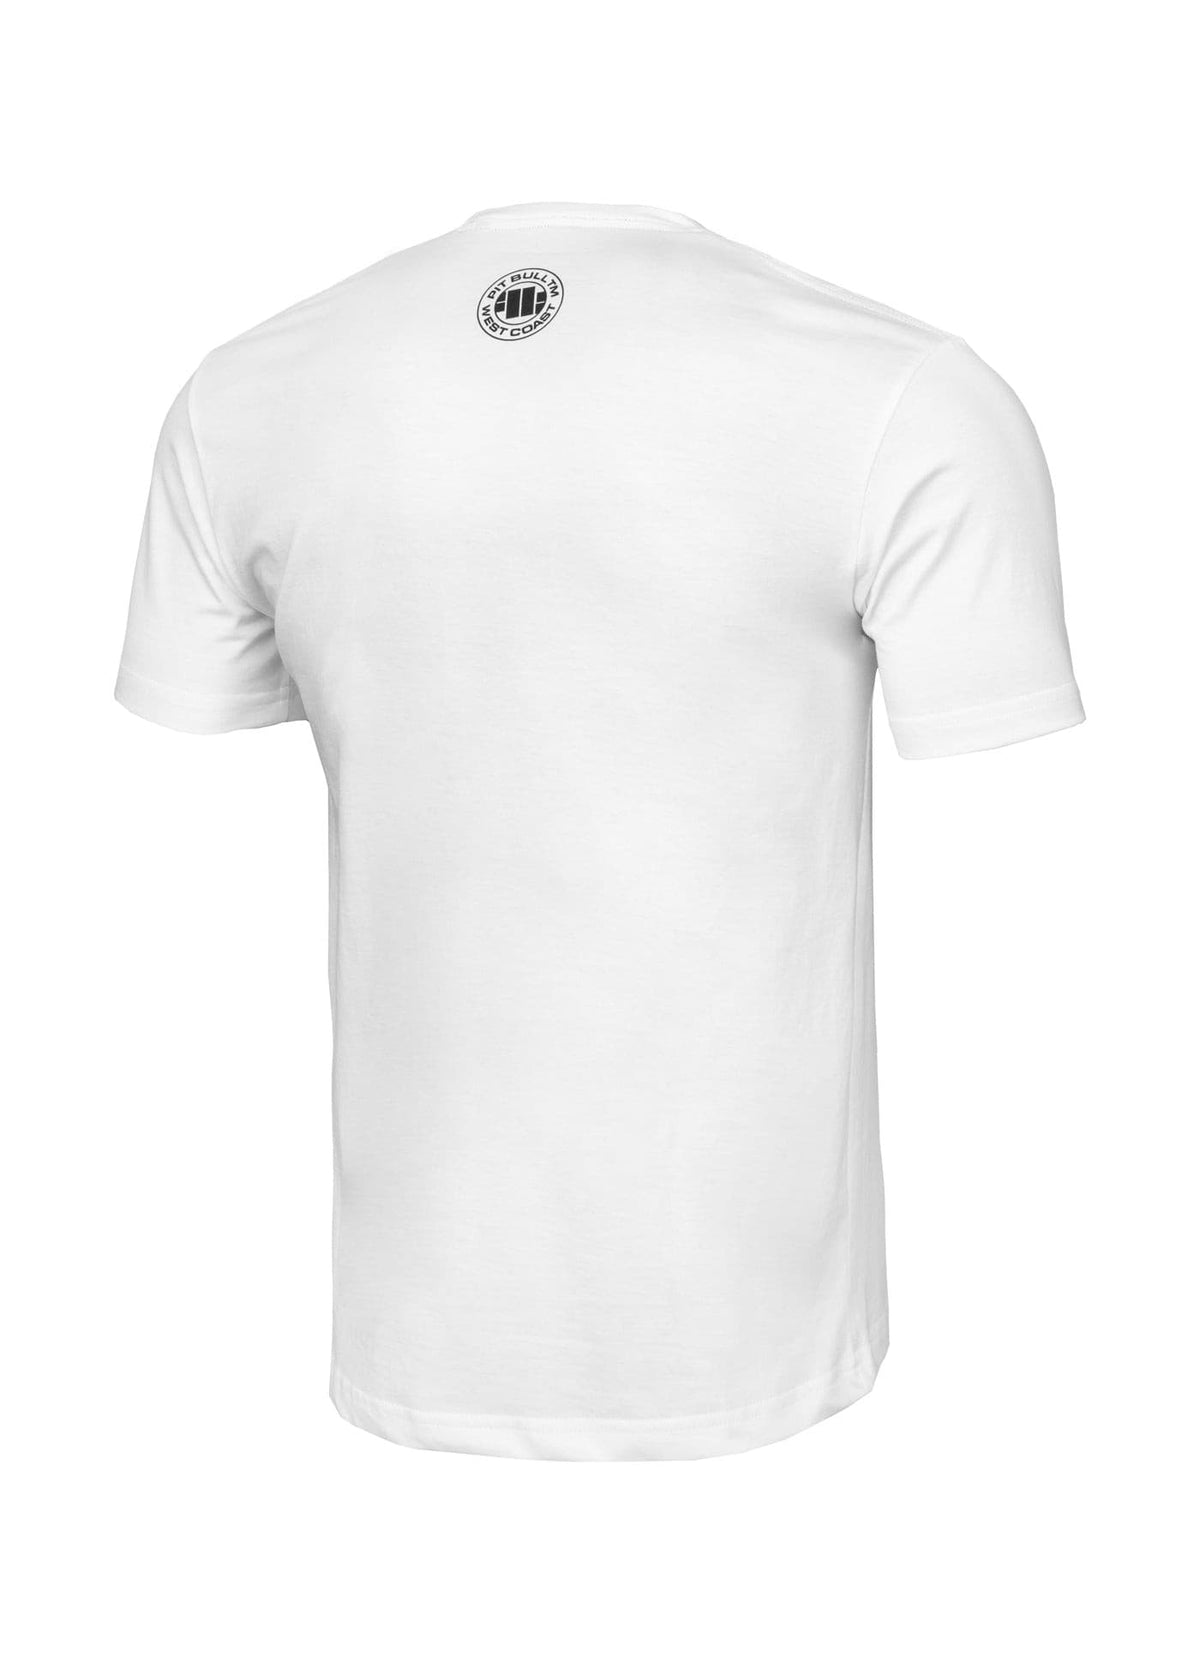 Official ADCC White T-Shirt